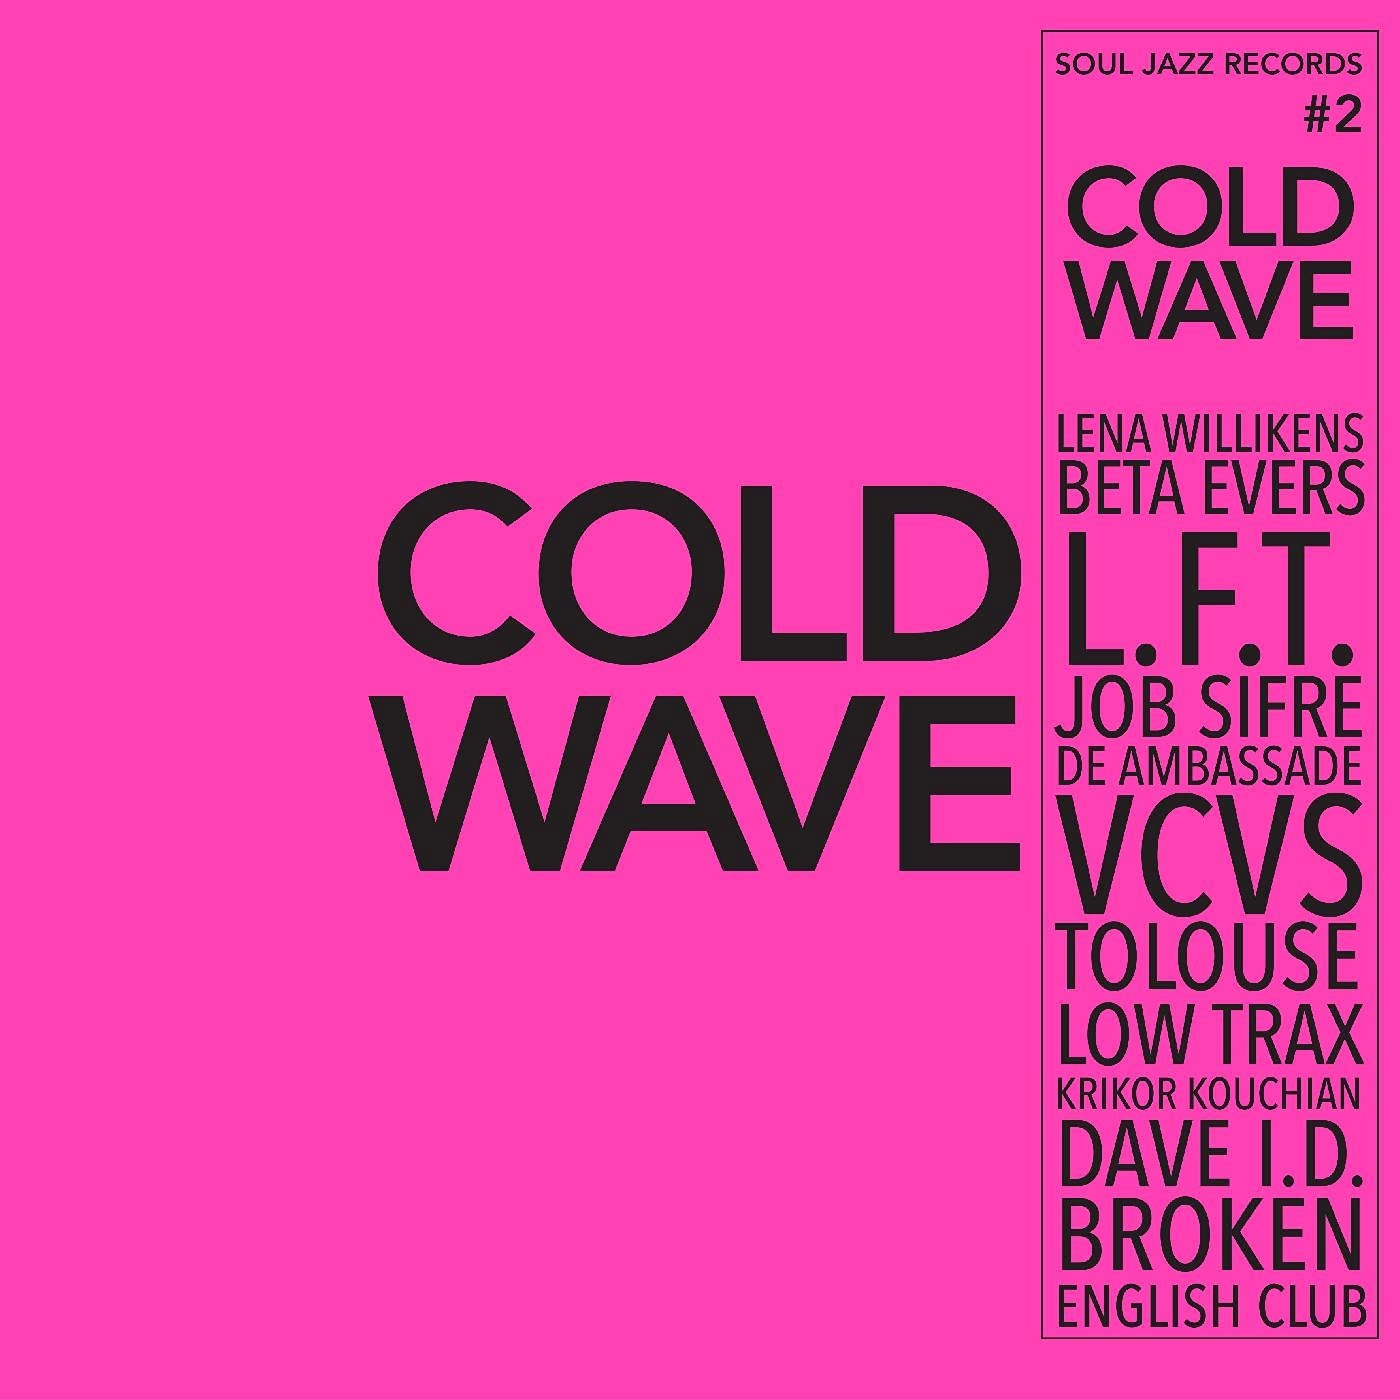 Beta evers. Cold waves